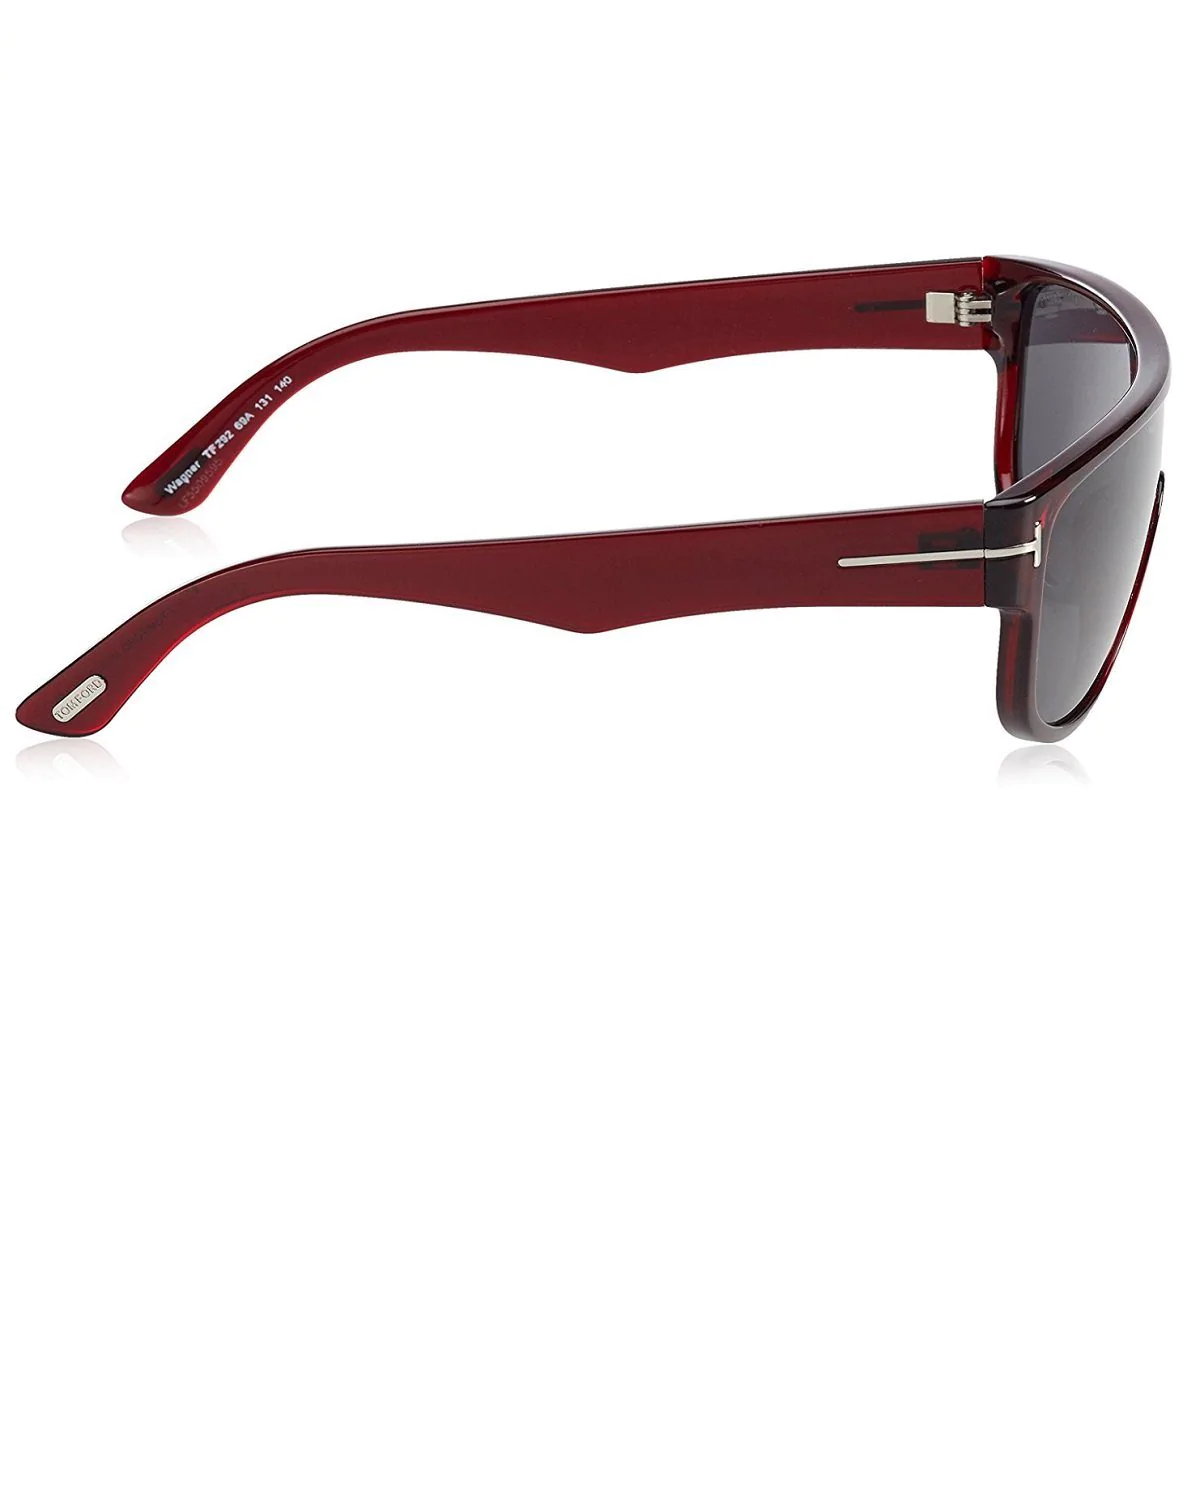 Tom Ford TF 292 69A Wagner Burgundy Sunglasses